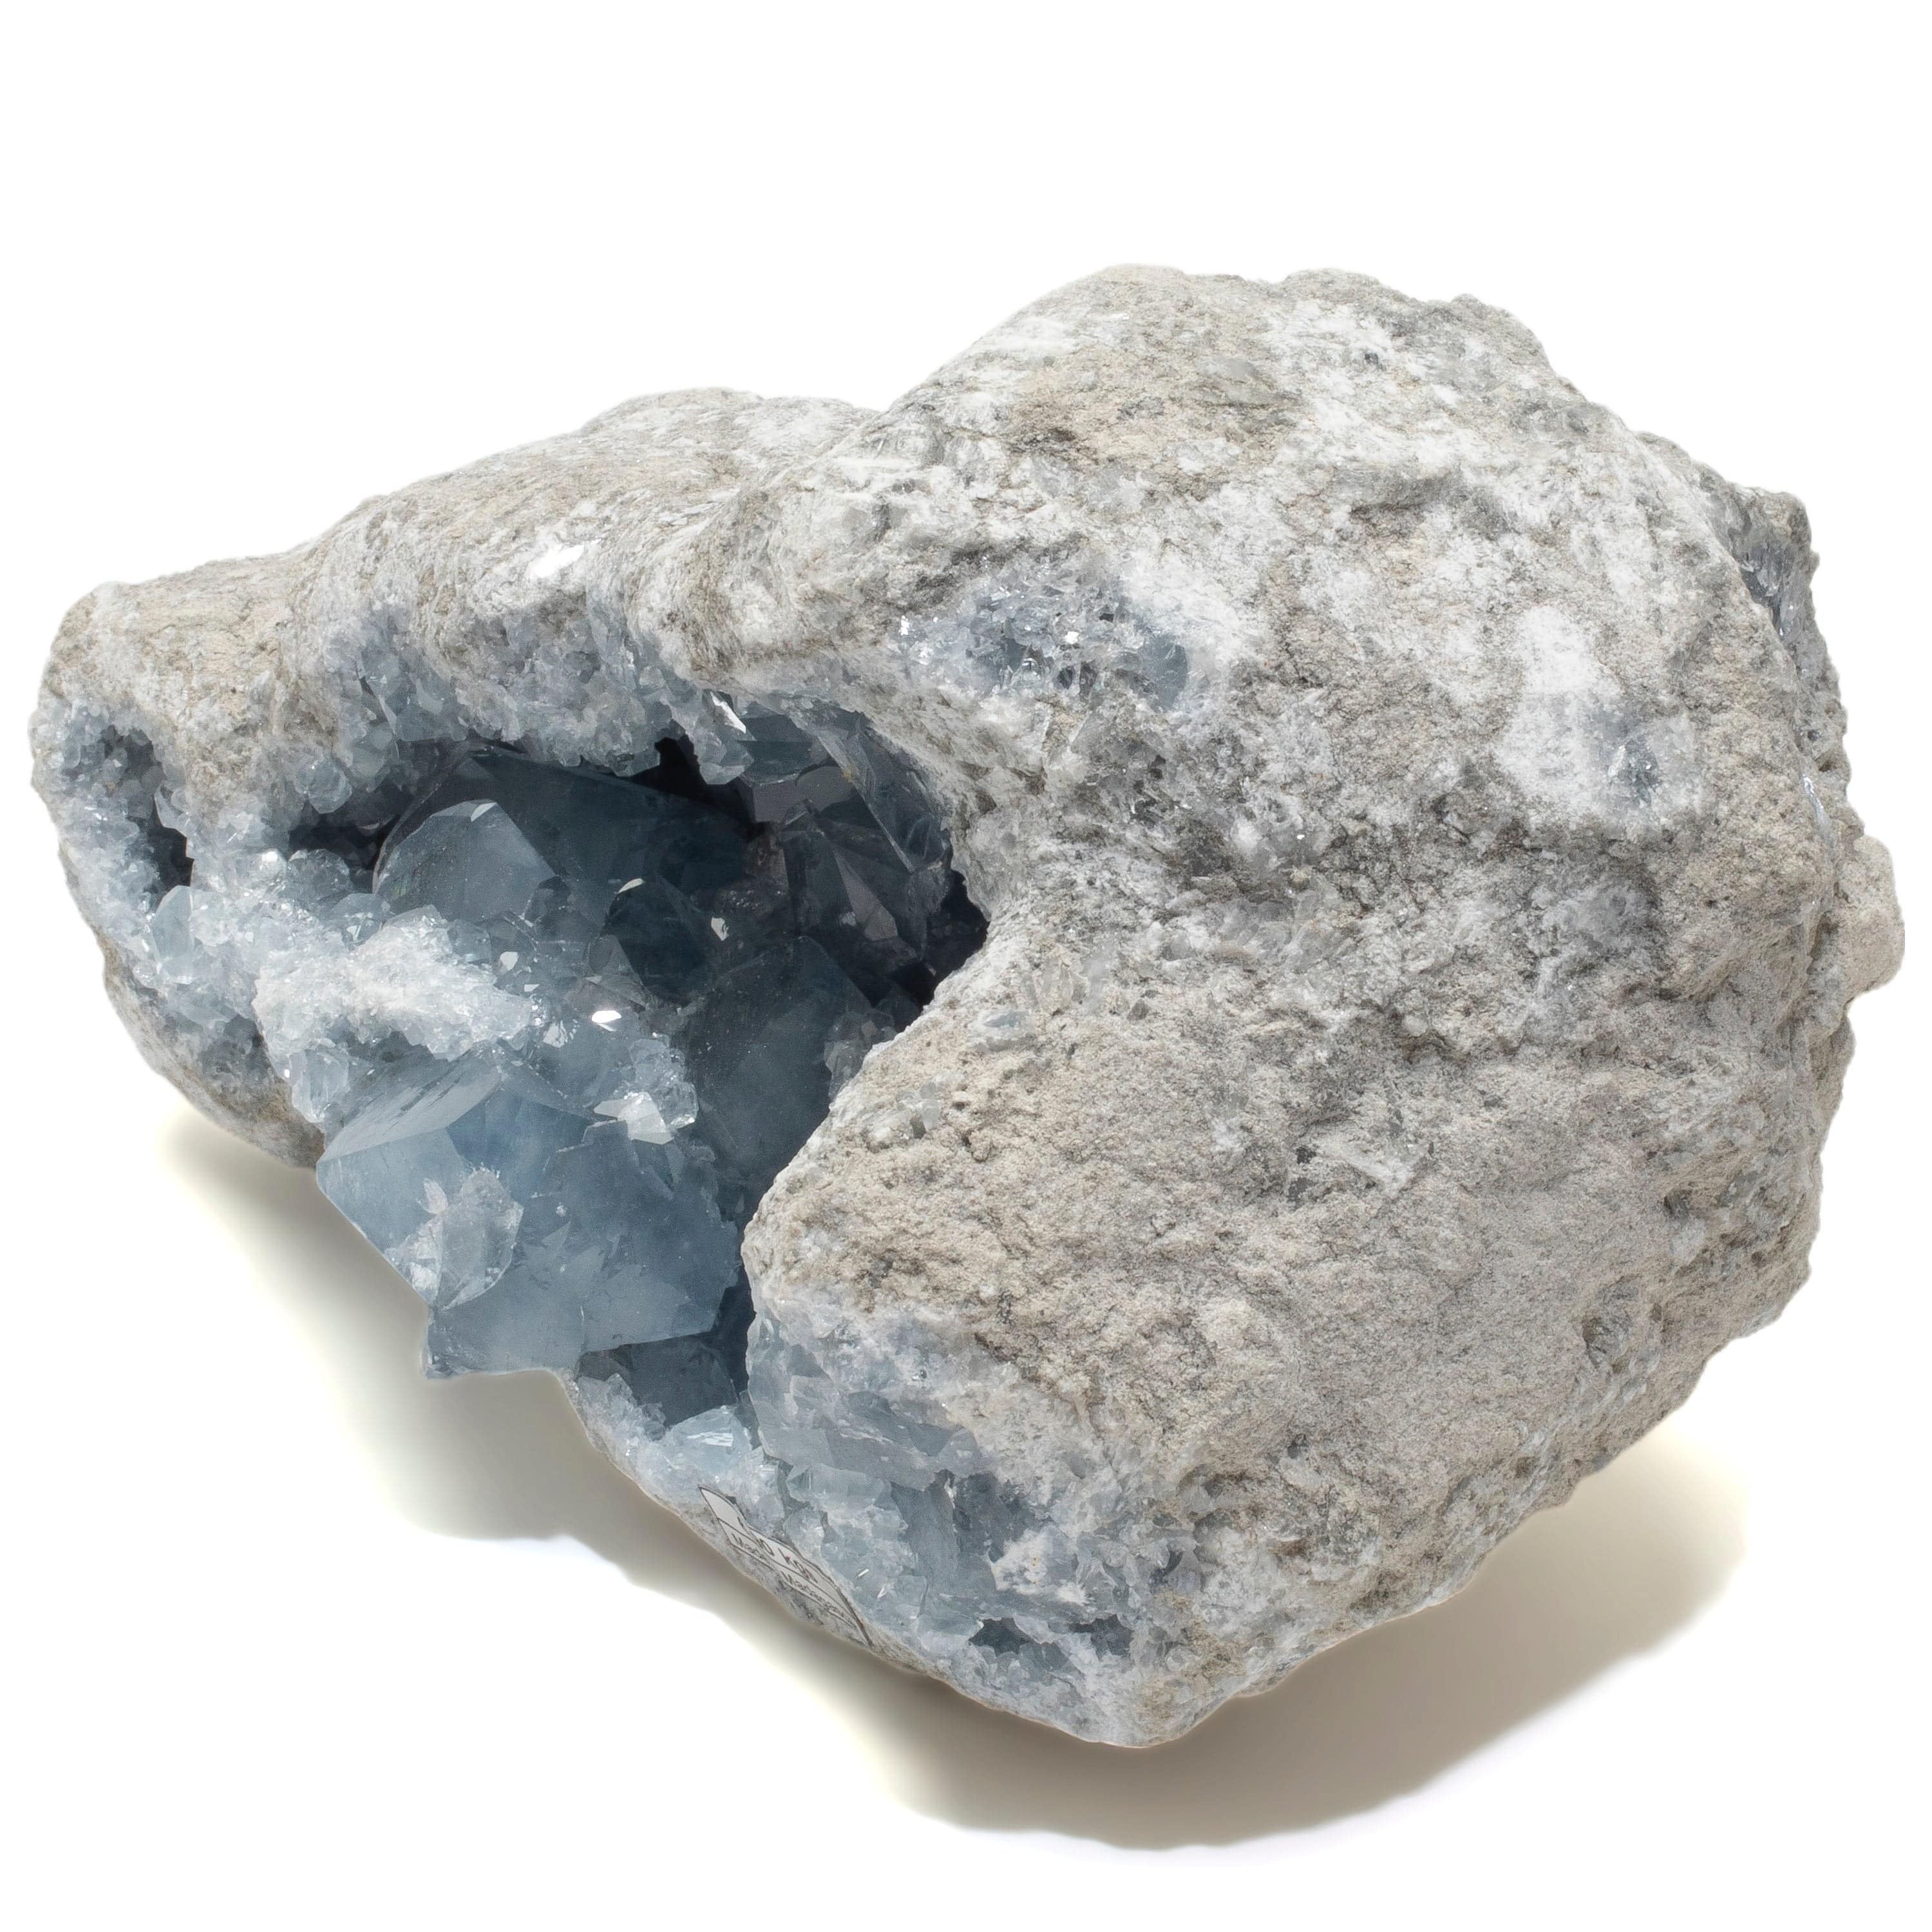 Kalifano Celestite Natural Celestite Crystal Cluster Geode from Madagascar - 9 in. CG2500.002